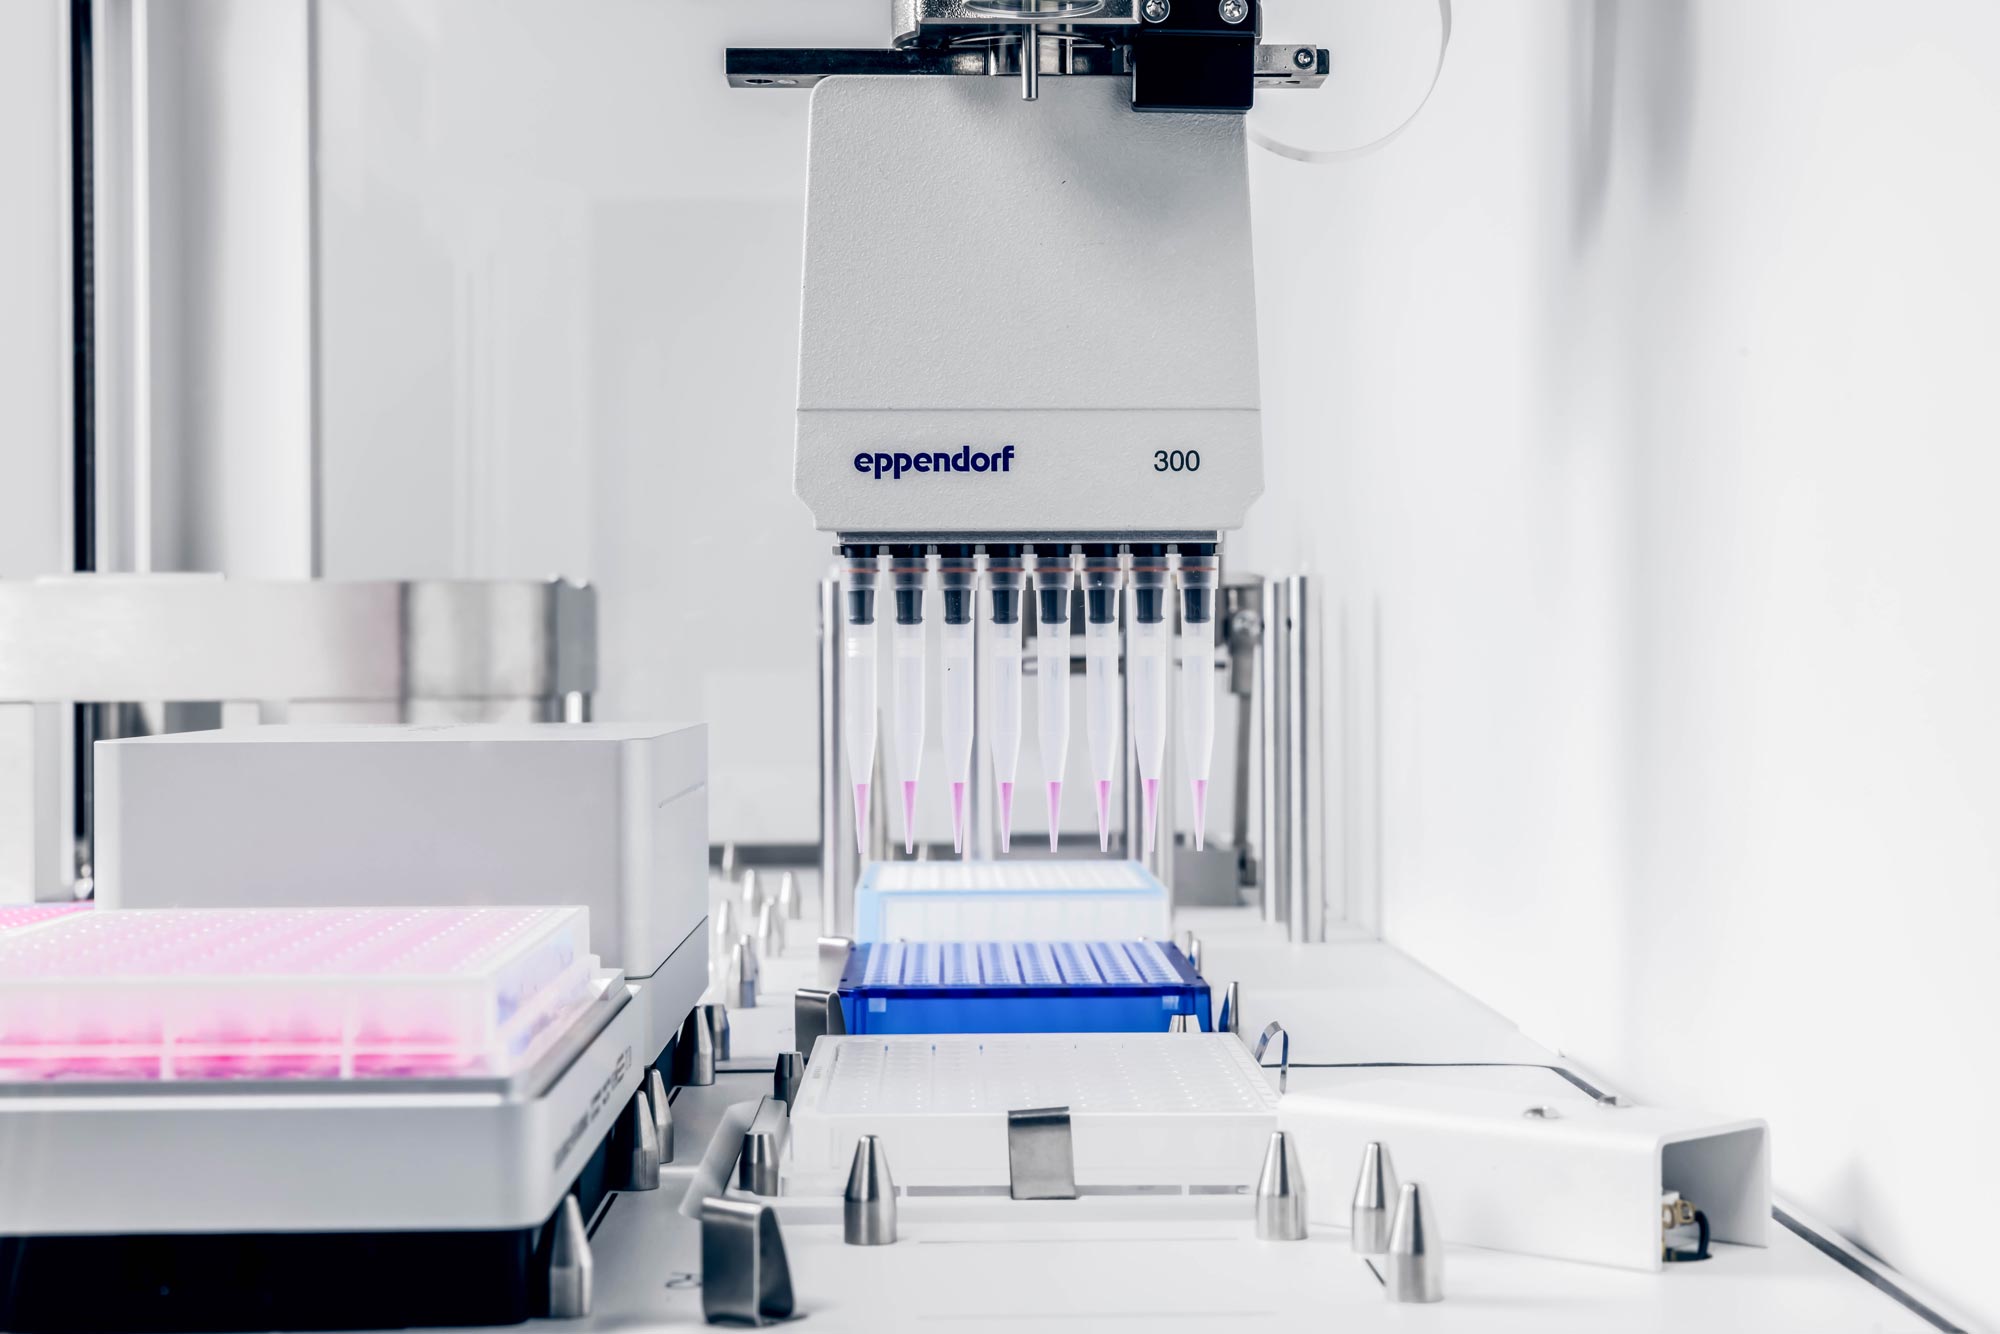  – Performance Validation of Absorbance 96 Automate Integrated on the Eppendorf® epMotion® Deck for Automated Cell-Based Assay Employing CytoTox 96® Kit